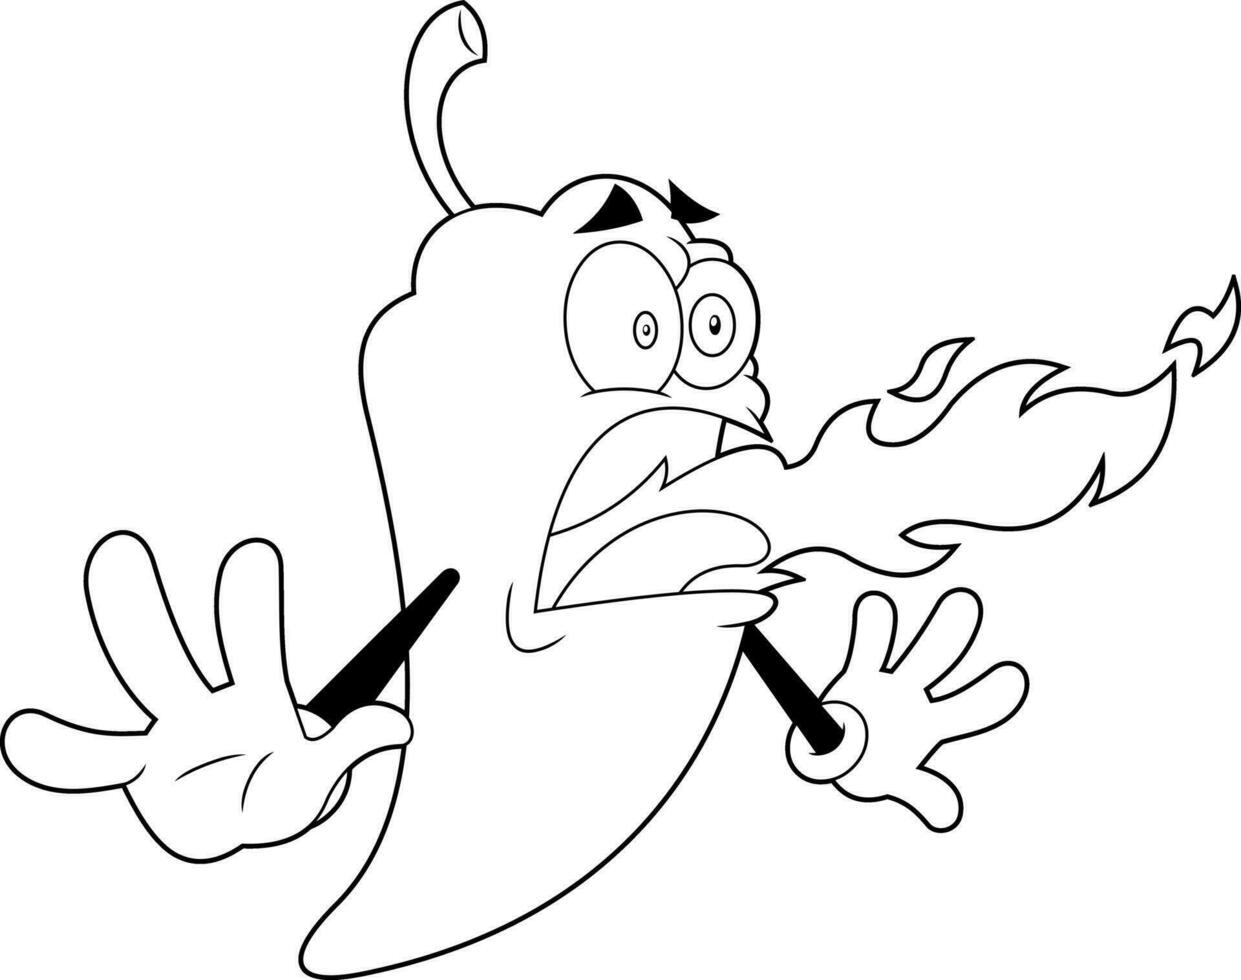 Outlined Funny Hot Chili Pepper Cartoon Character Breathing Fire. Vector Hand Drawn Illustration